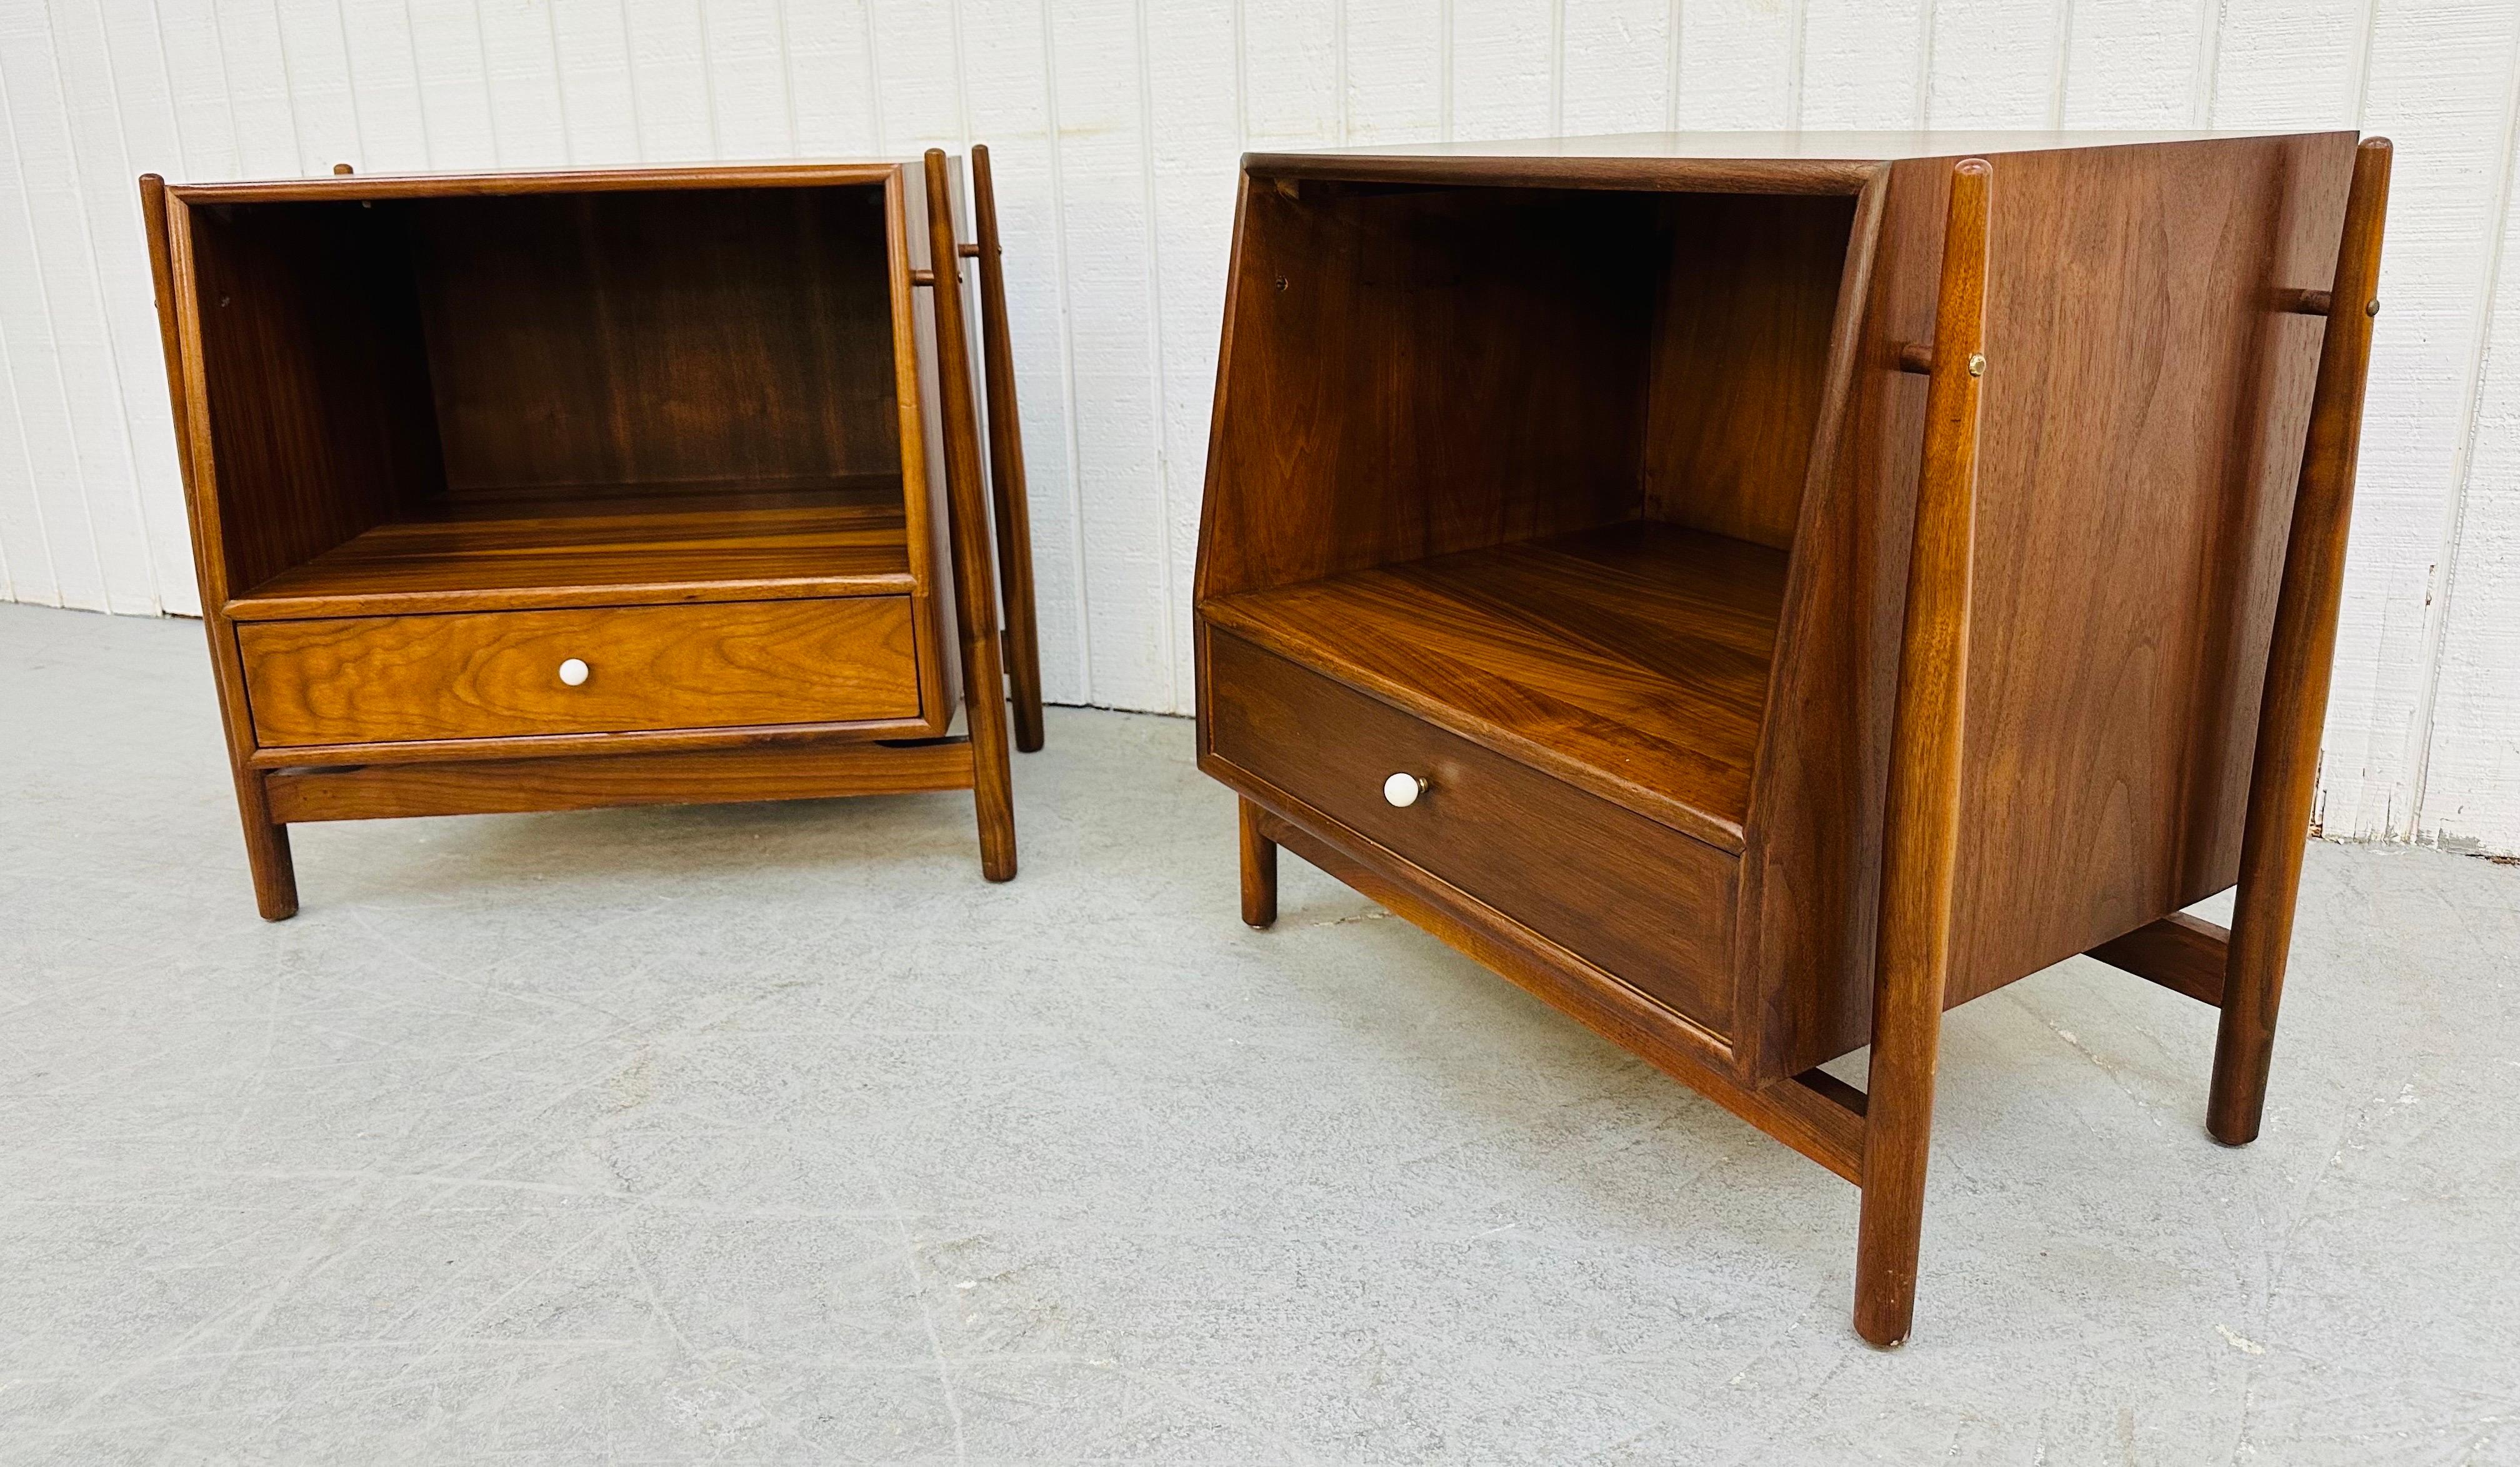 This listing is for a pair of Mid-Century Modern Drexel Declaration Walnut Nightstands. Featuring a floating cube design, free formed legs, open space for storage, a single drawer with original white knob, and a beautiful walnut finish. This is an